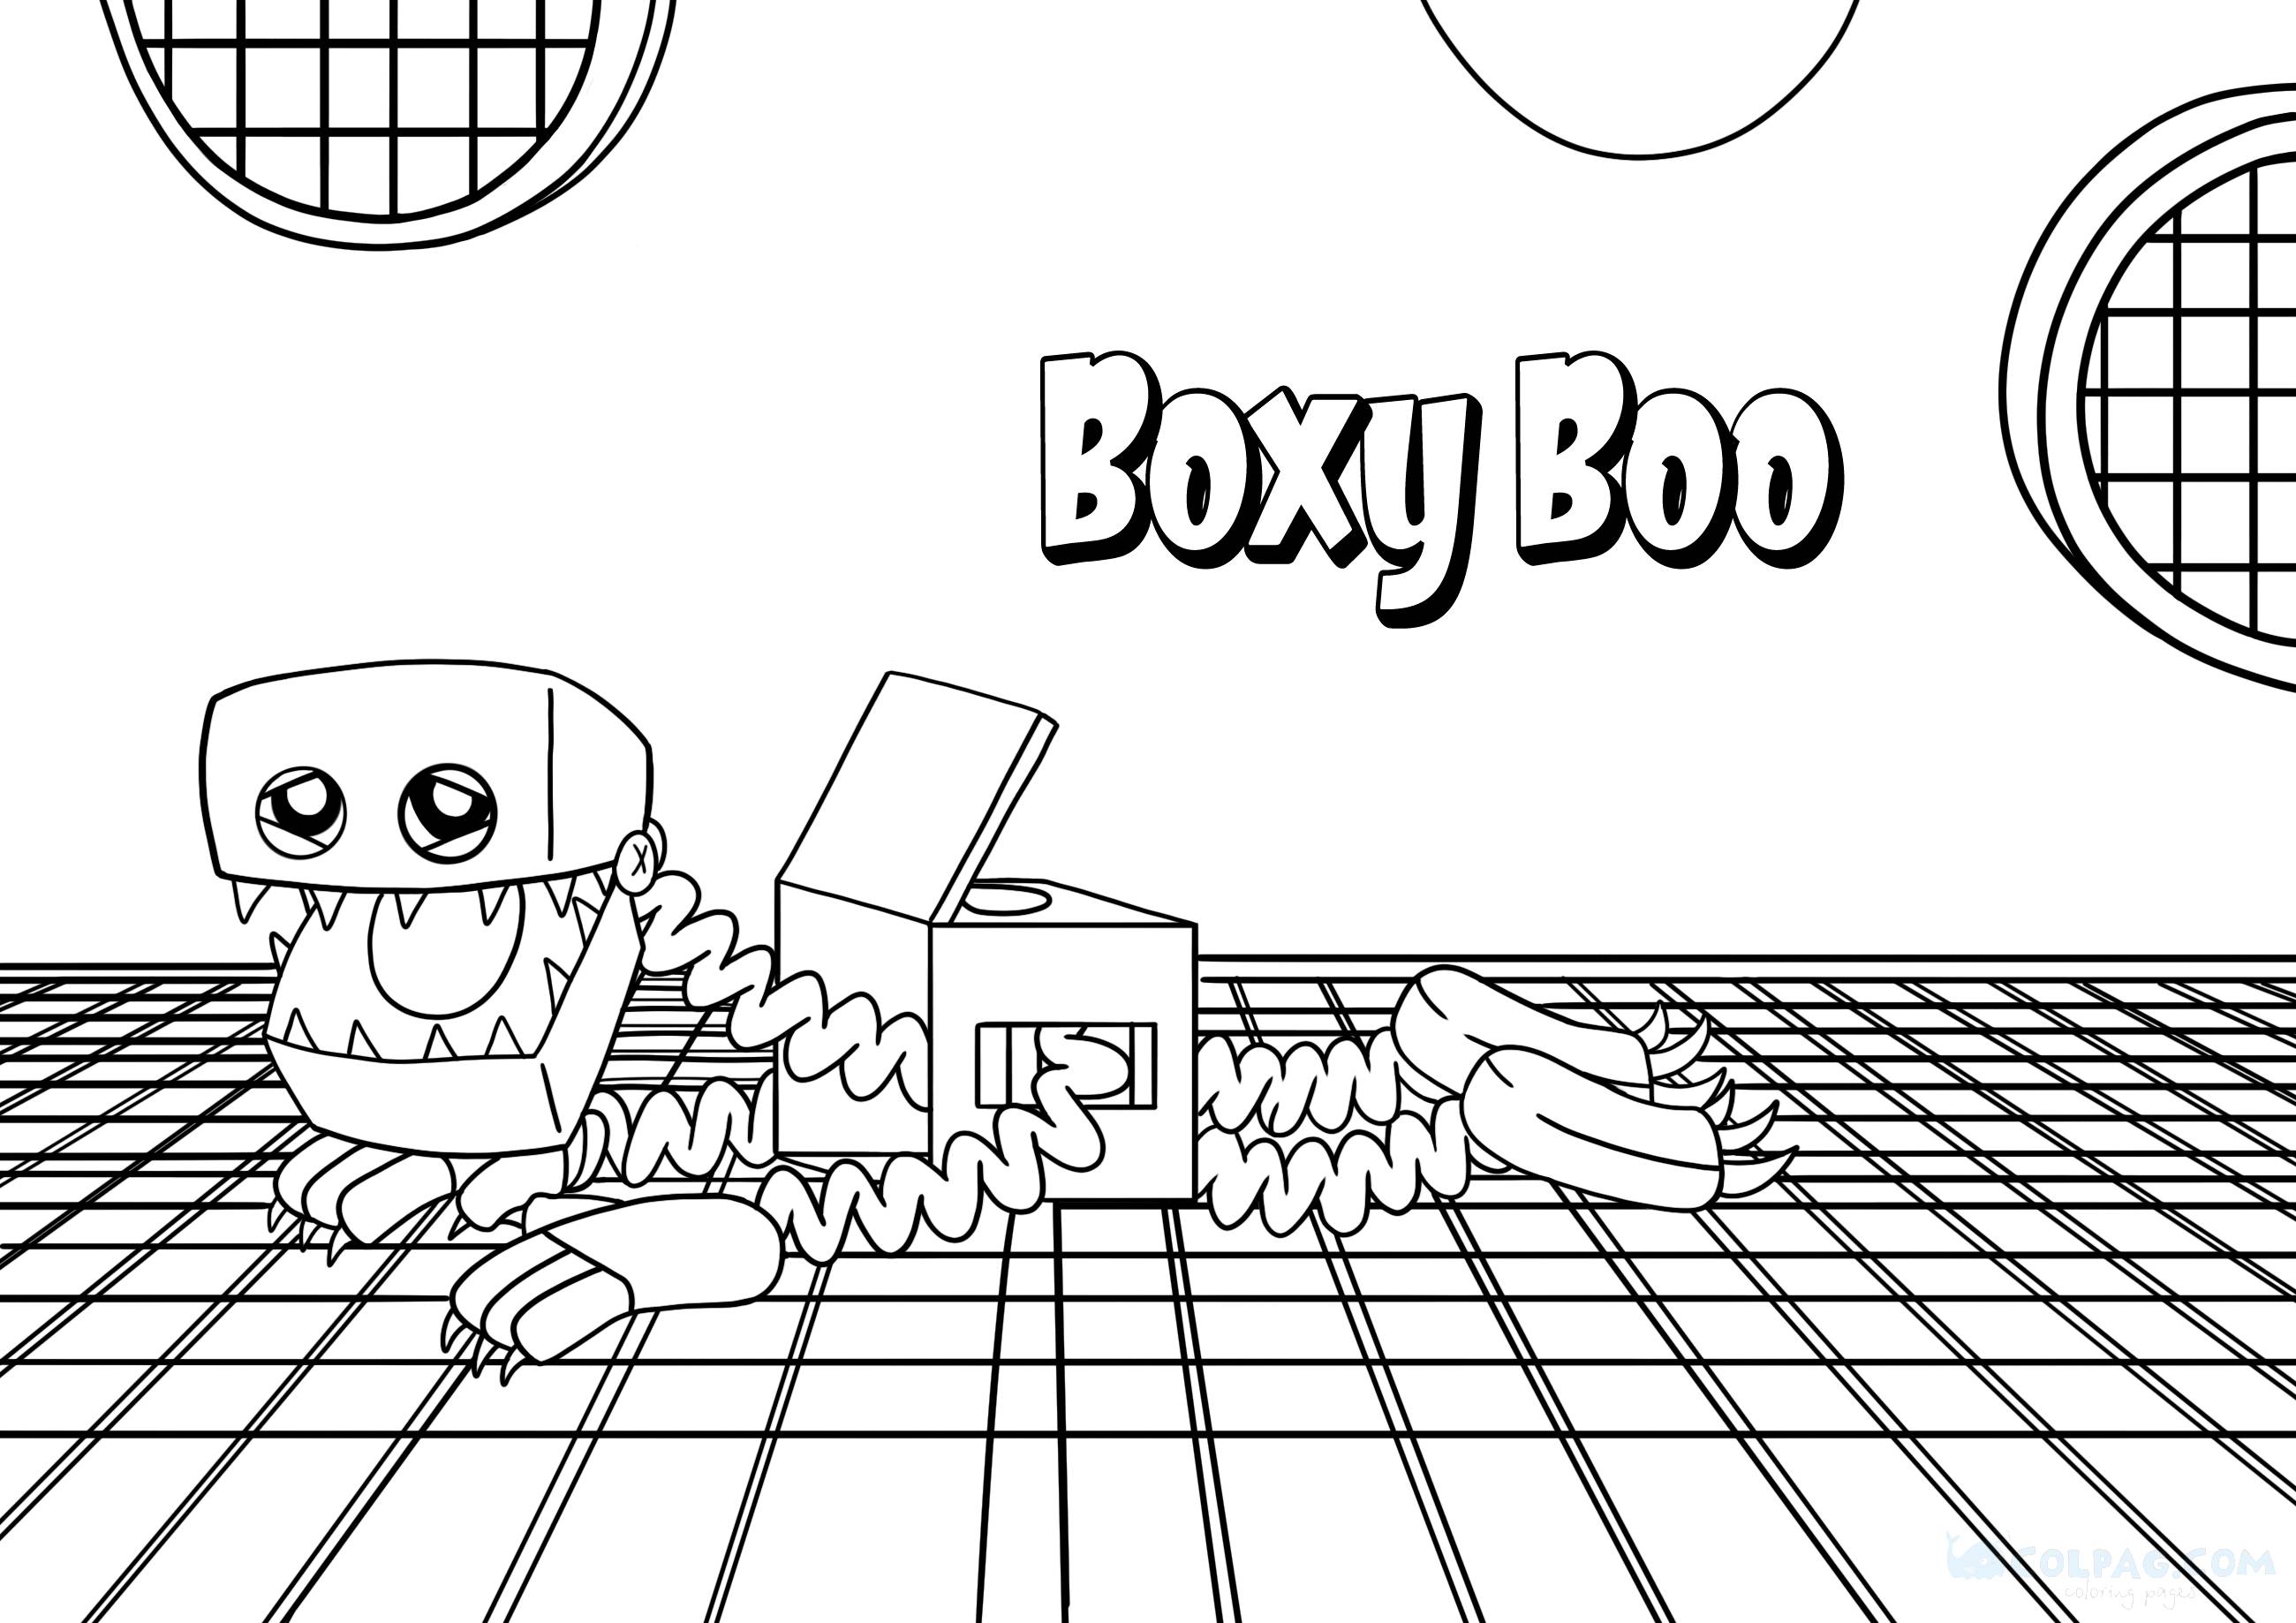 boxy-boo-project-playtime-coloring-page-colpag-com-7